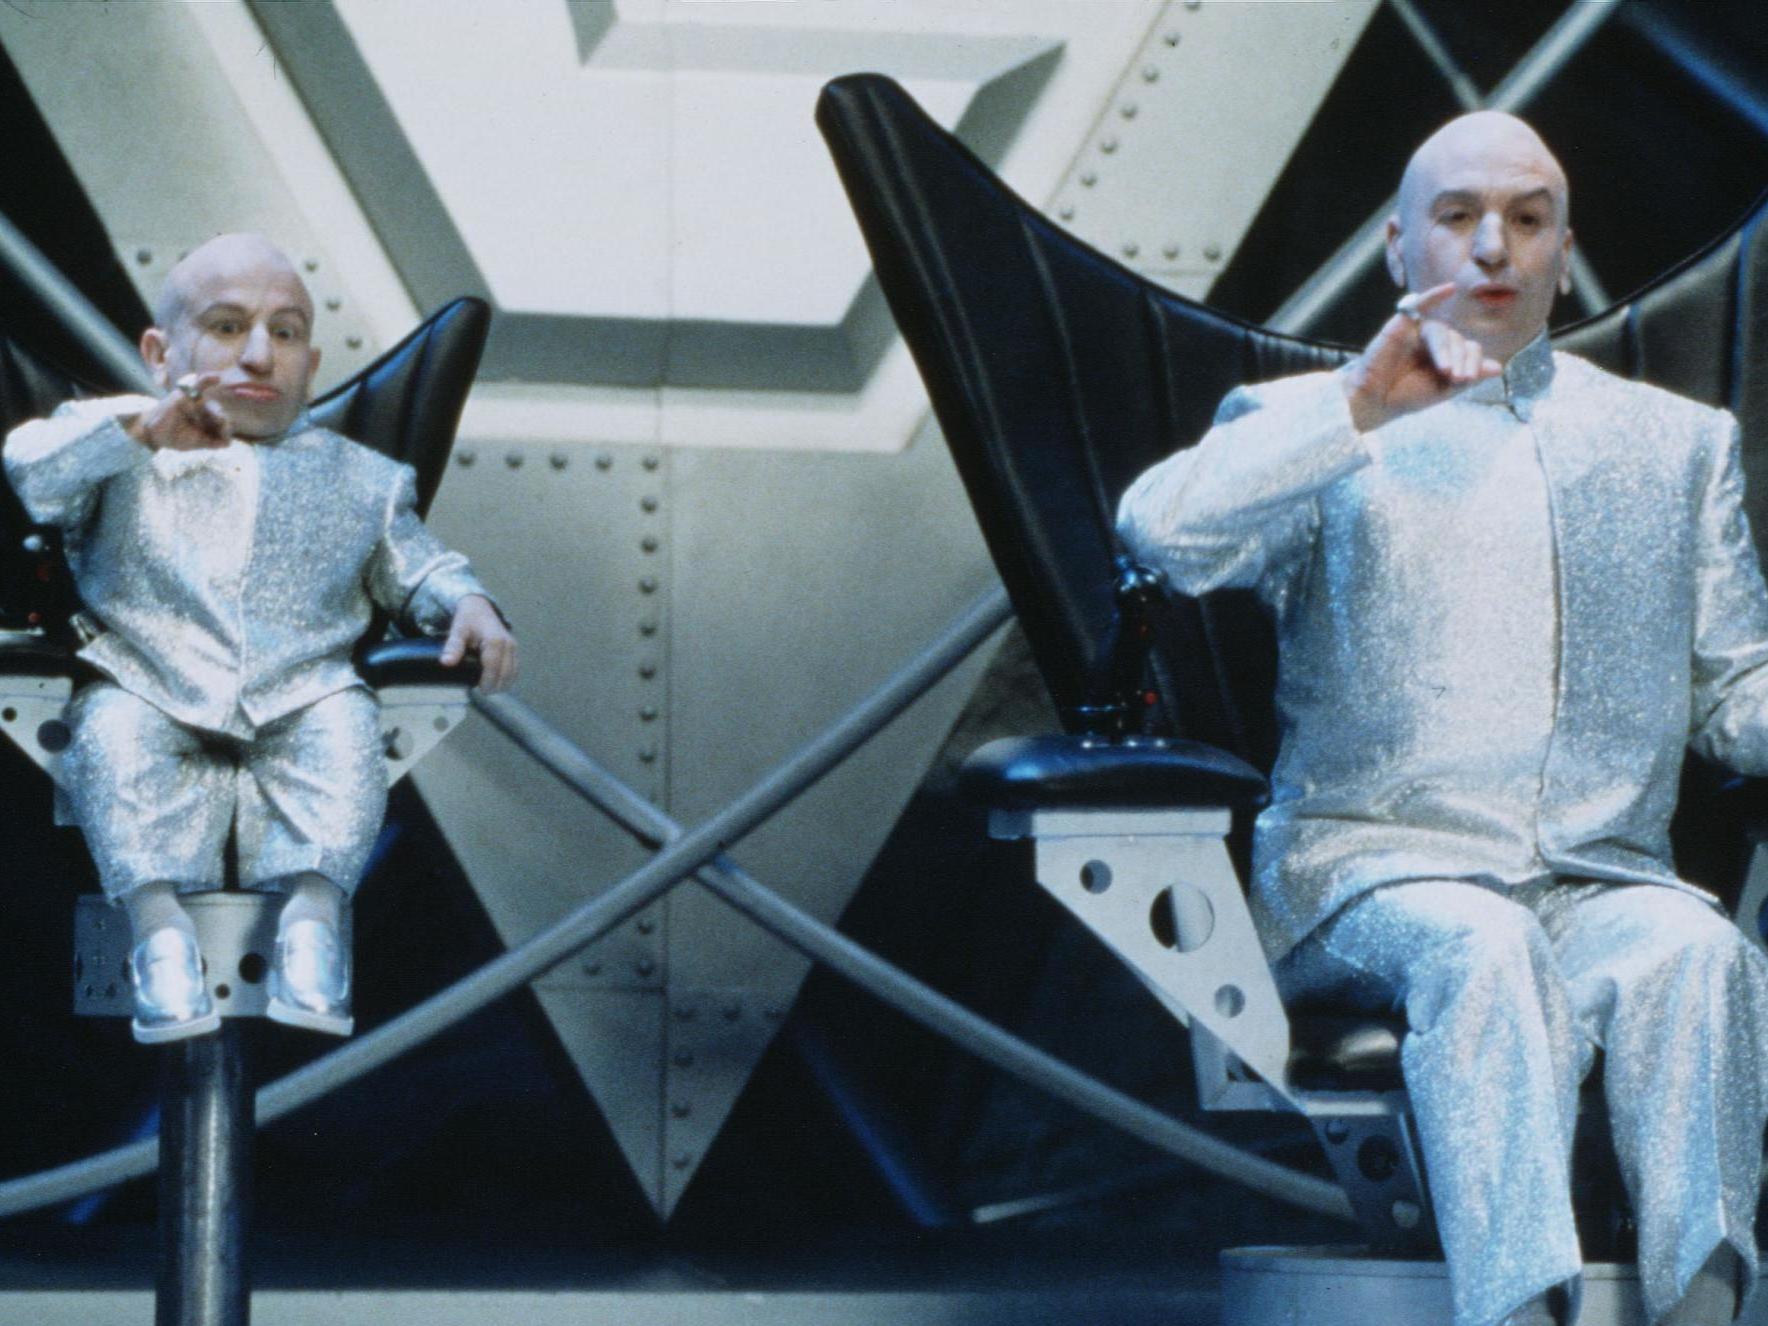 Mike Myers and Verne Troyer, who died in April last year